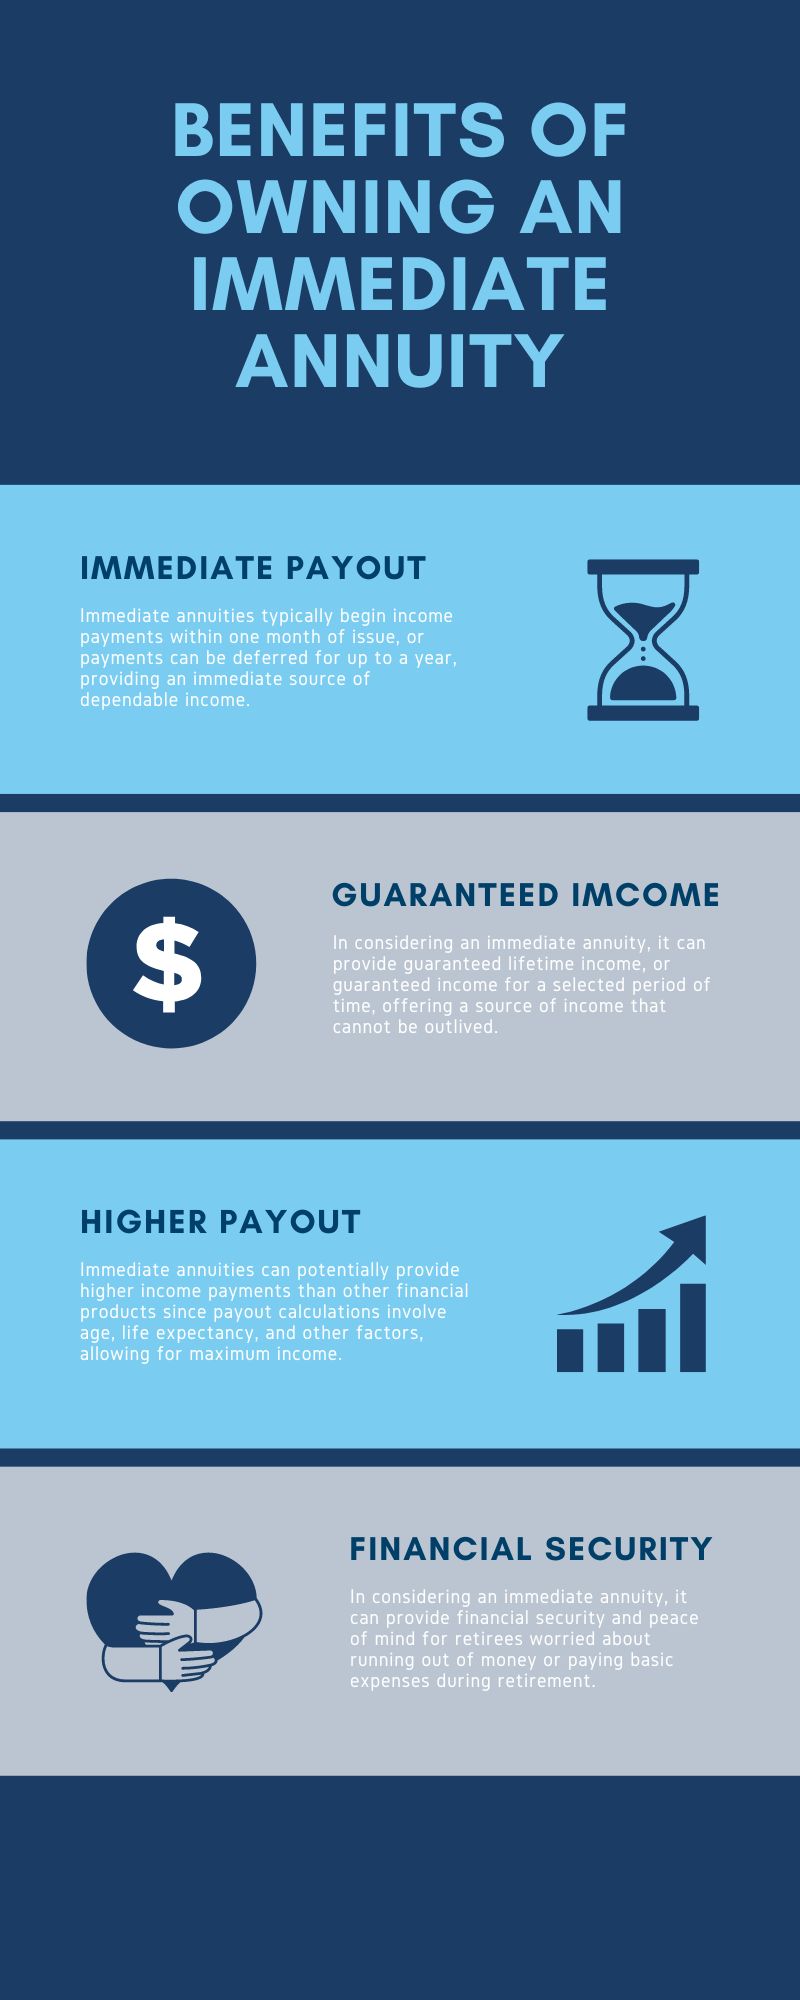 Benefits of Owning an Immediate Annuity infographic (1)